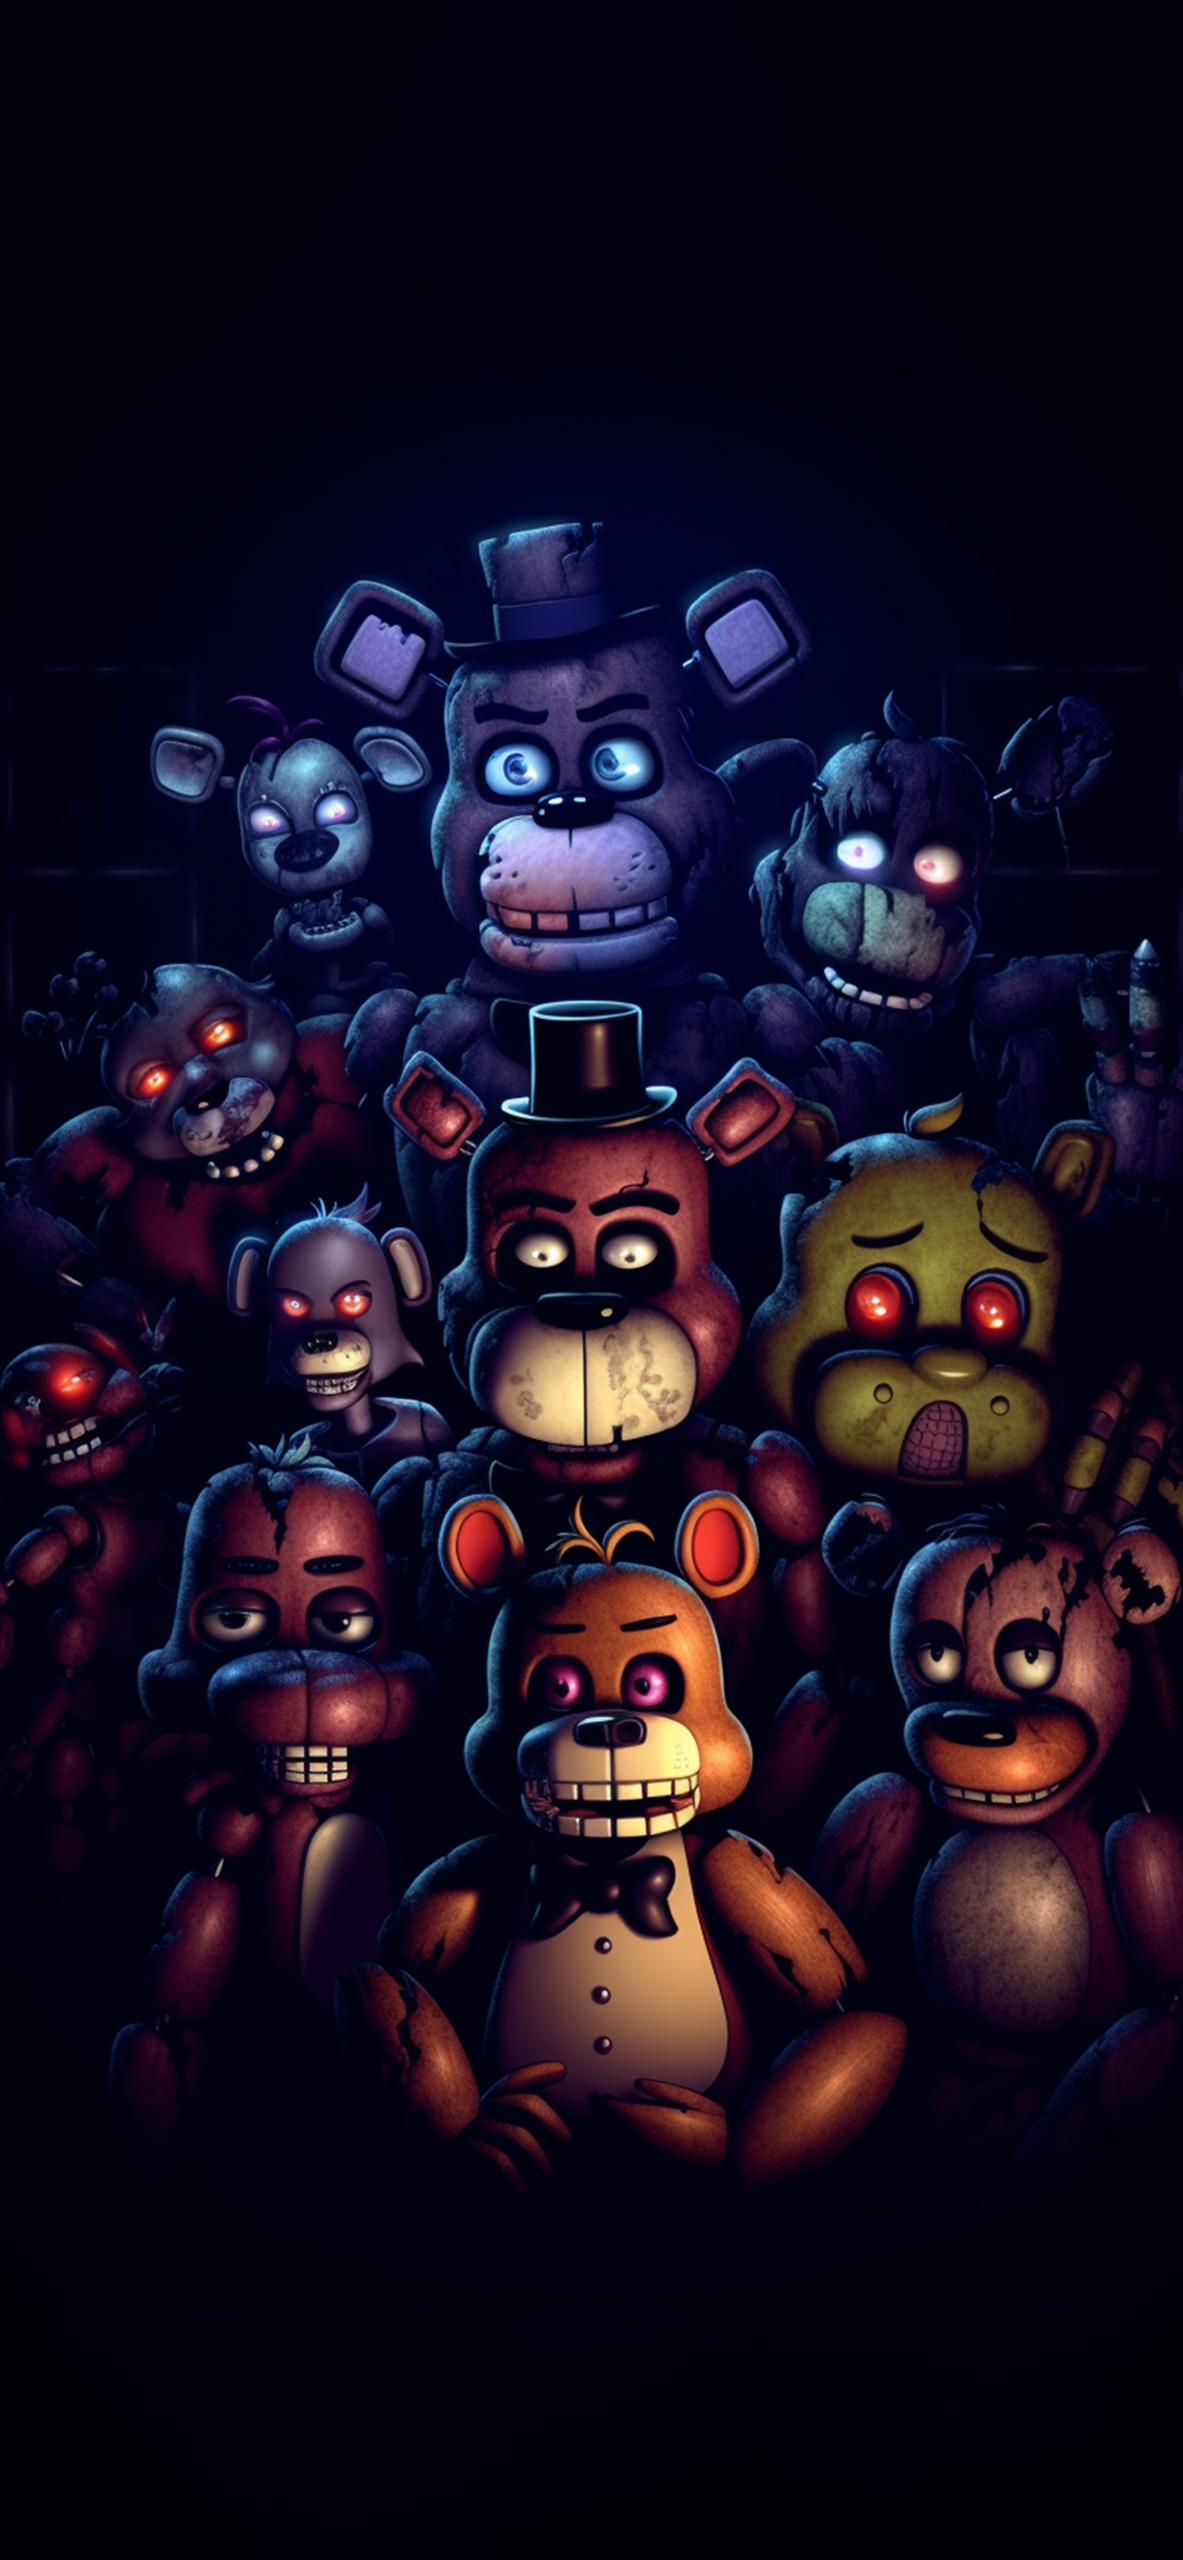 Download Freddy the fox taps into his cute side in this sweet Fnaf  wallpaper Wallpaper  Wallpaperscom